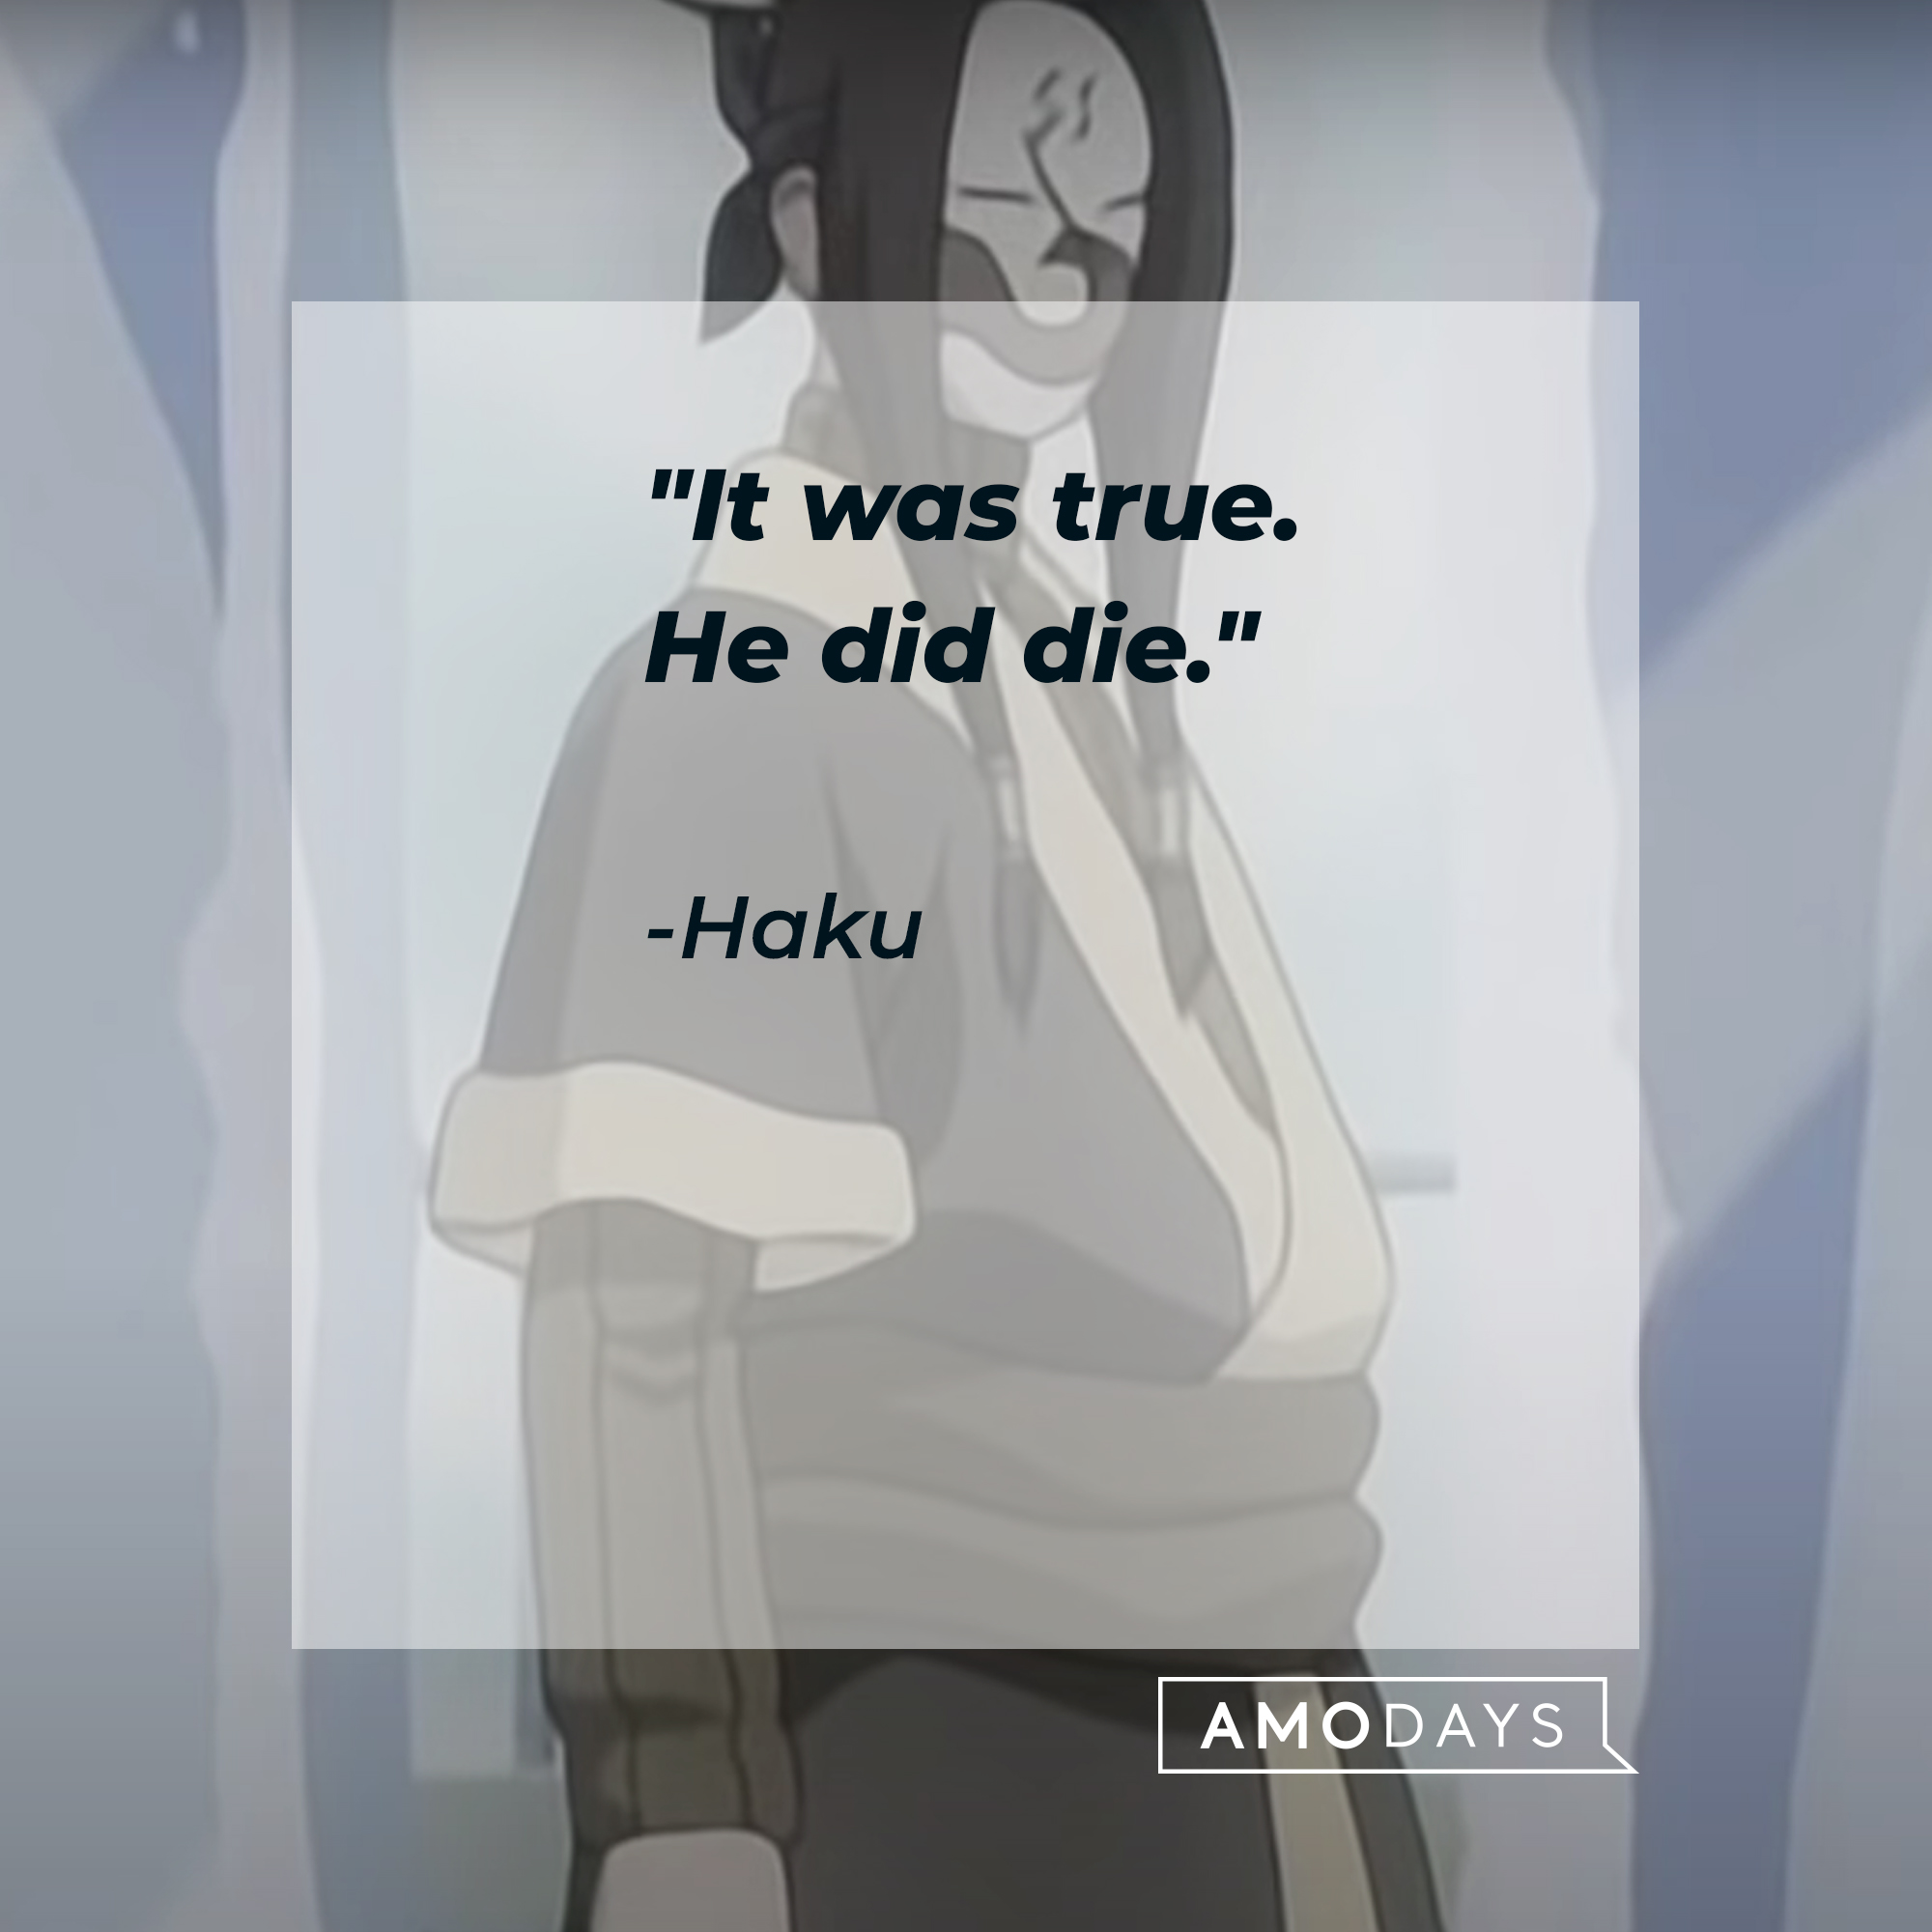 Haku, with his quote: “It was true. He did die.”| Source: facebook.com/narutoofficialsns